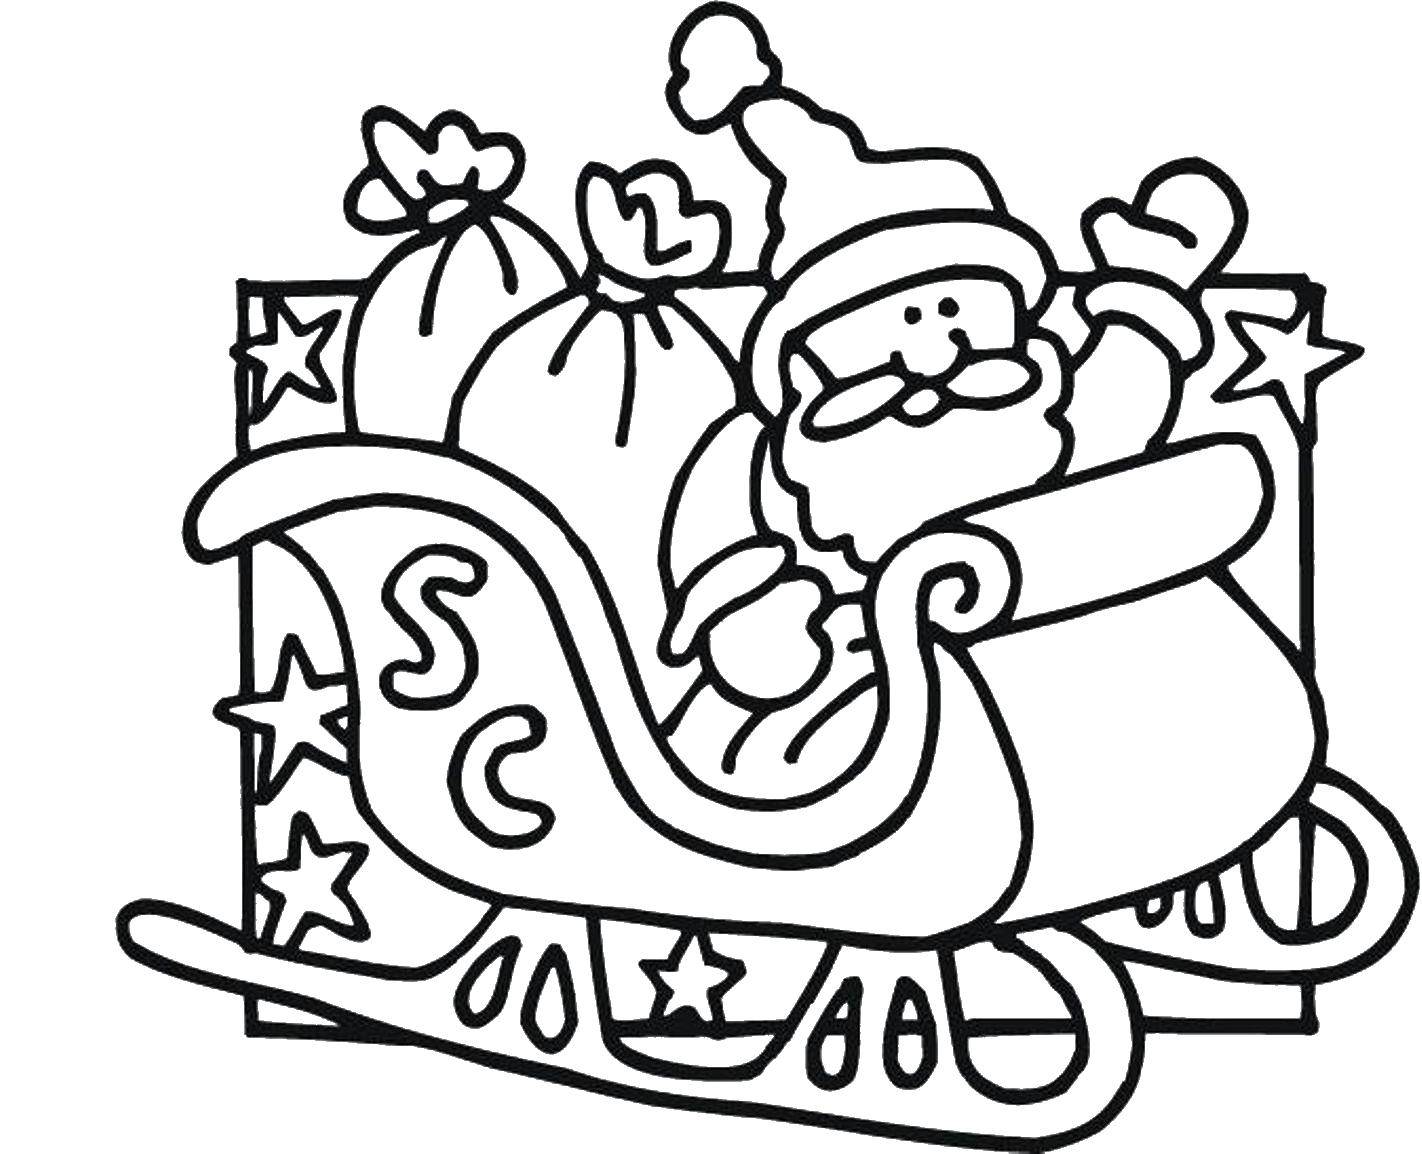 Coloring Santa Claus on a sled. Category Christmas. Tags:  Santa Claus, sleigh.